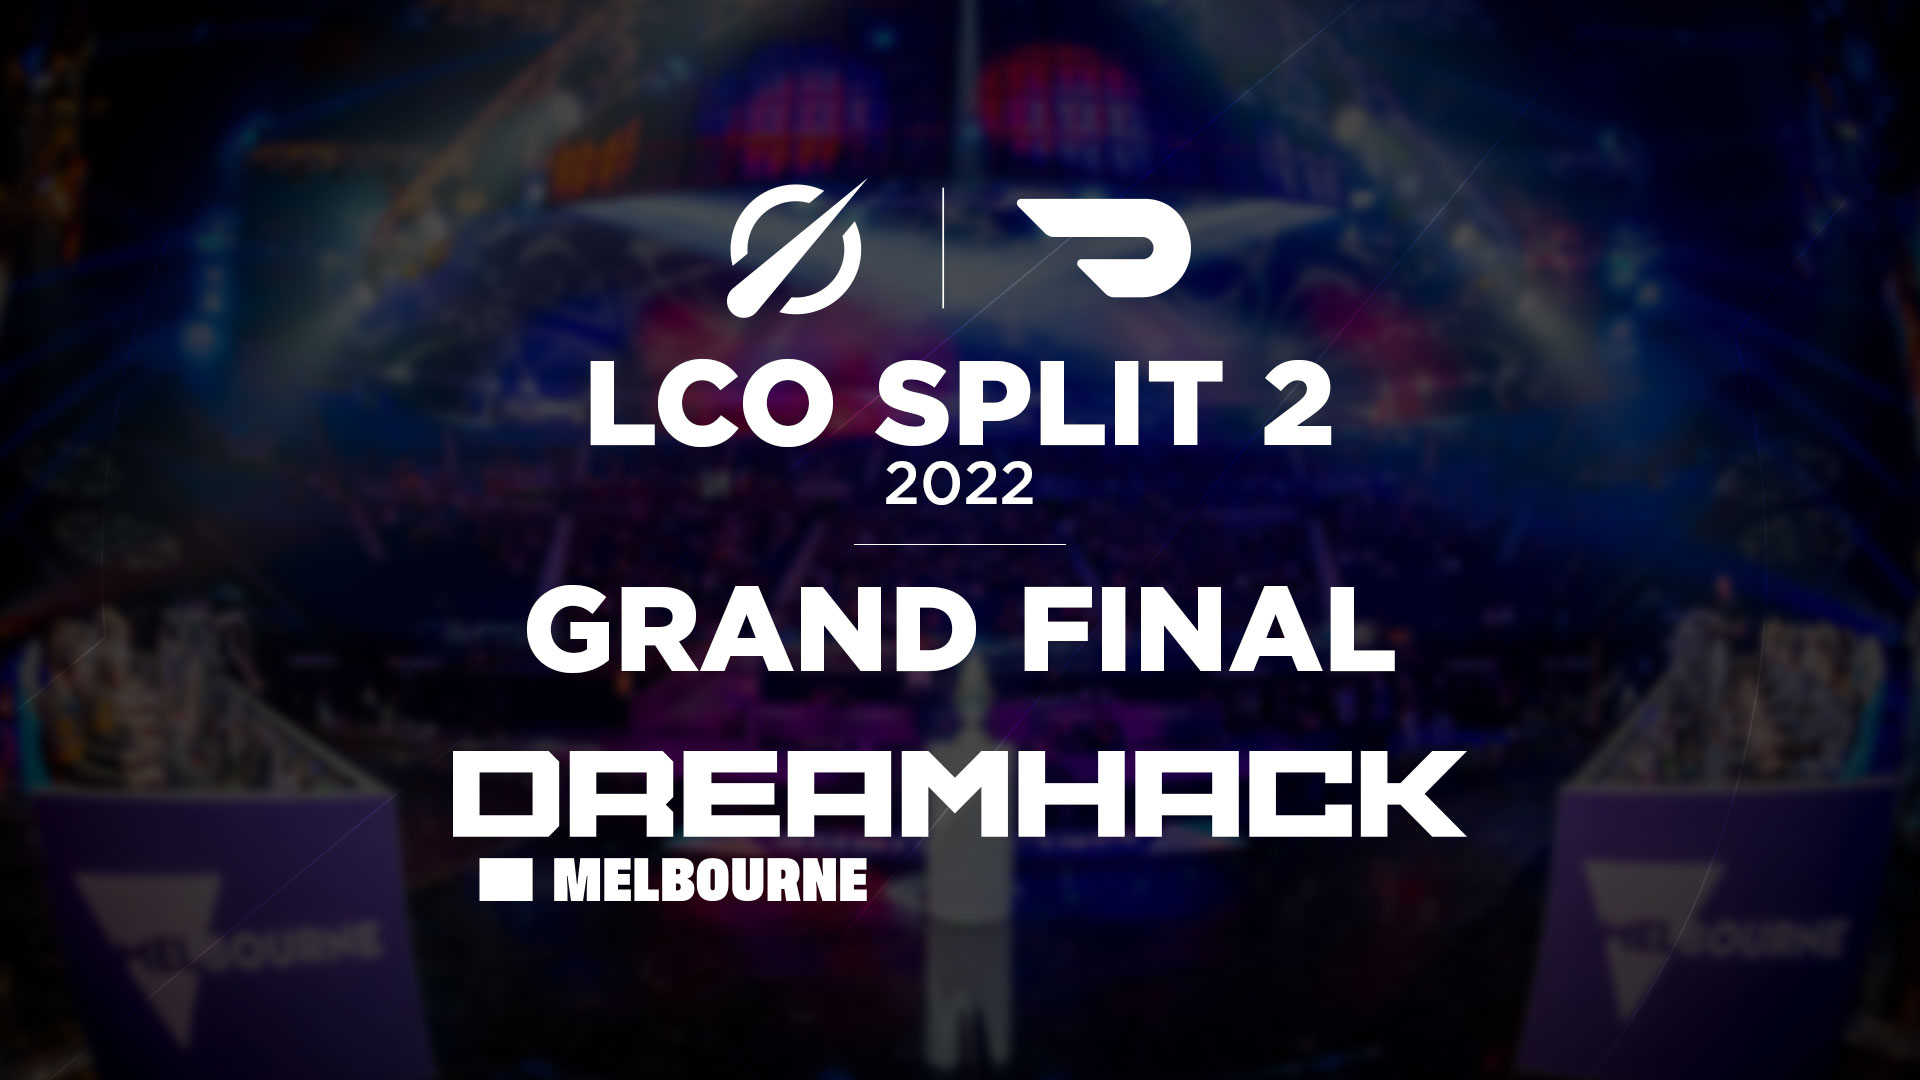 LCO LCO Split 2 2022 Grand Final To Be Held at DreamHack Melbourne